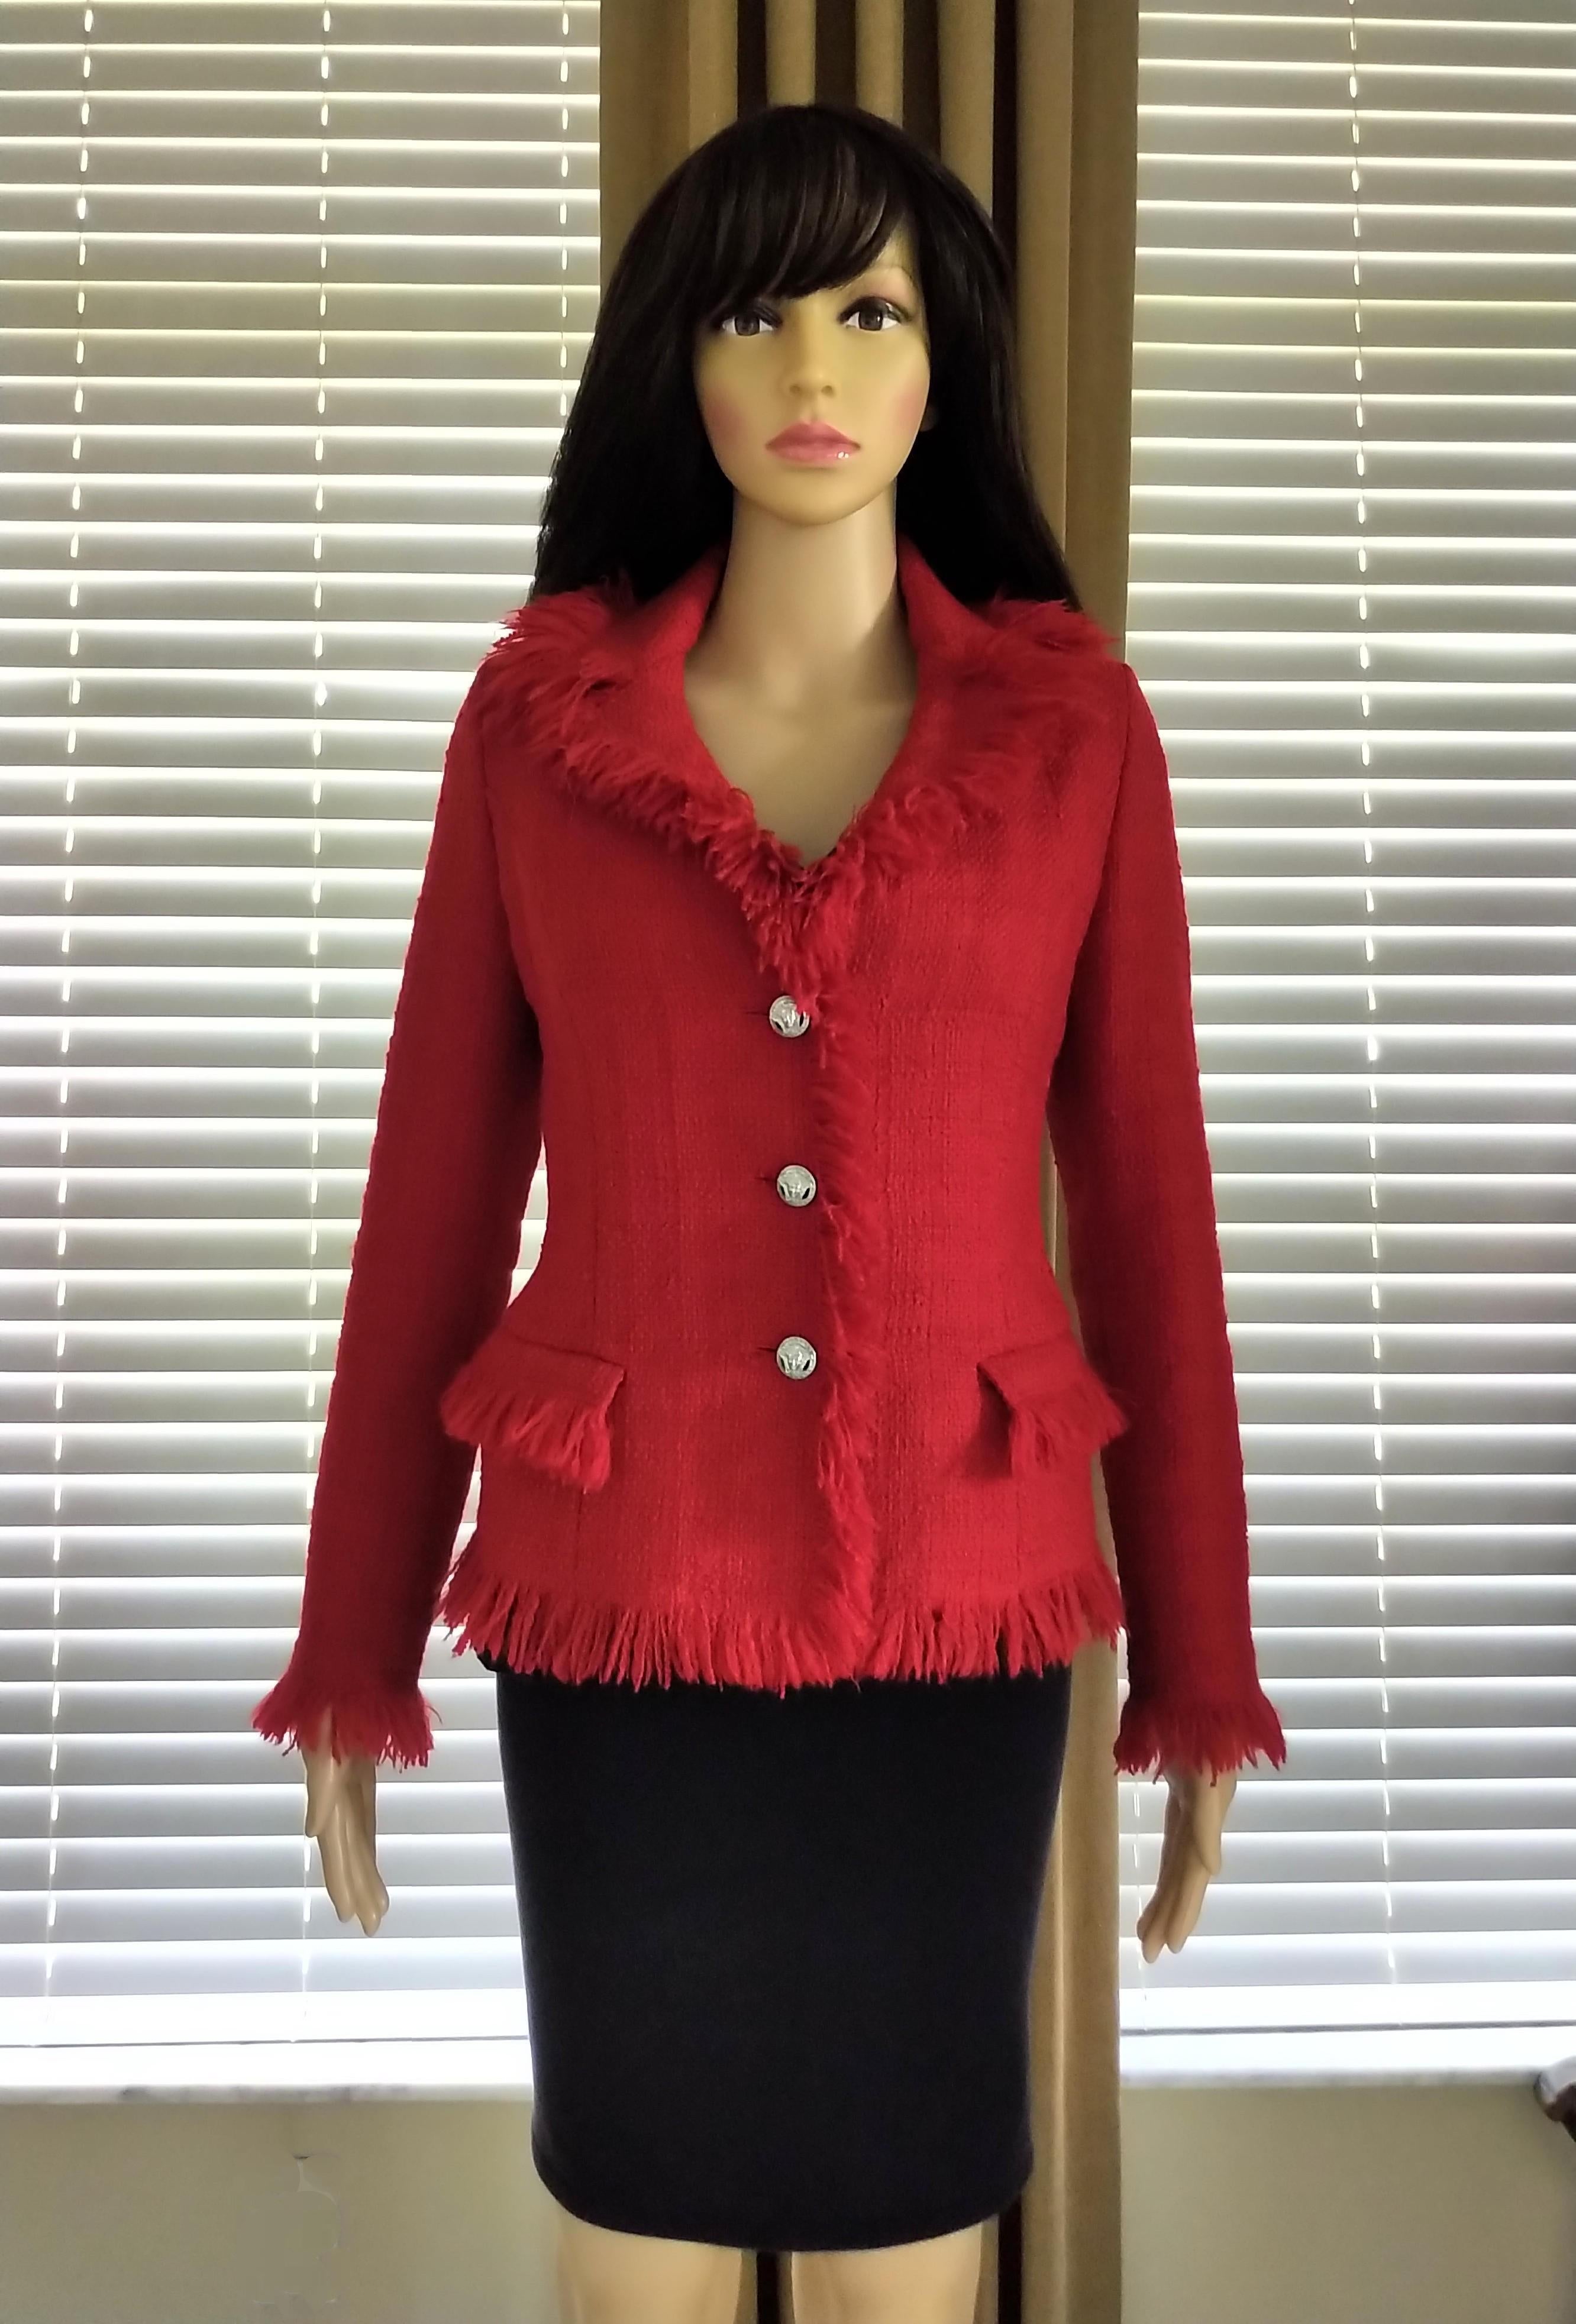 Gianni Versace 1990's Medusa Lipstick Red Tweed Fringe Fitted Jacket IT 38/ 2 4 For Sale 3